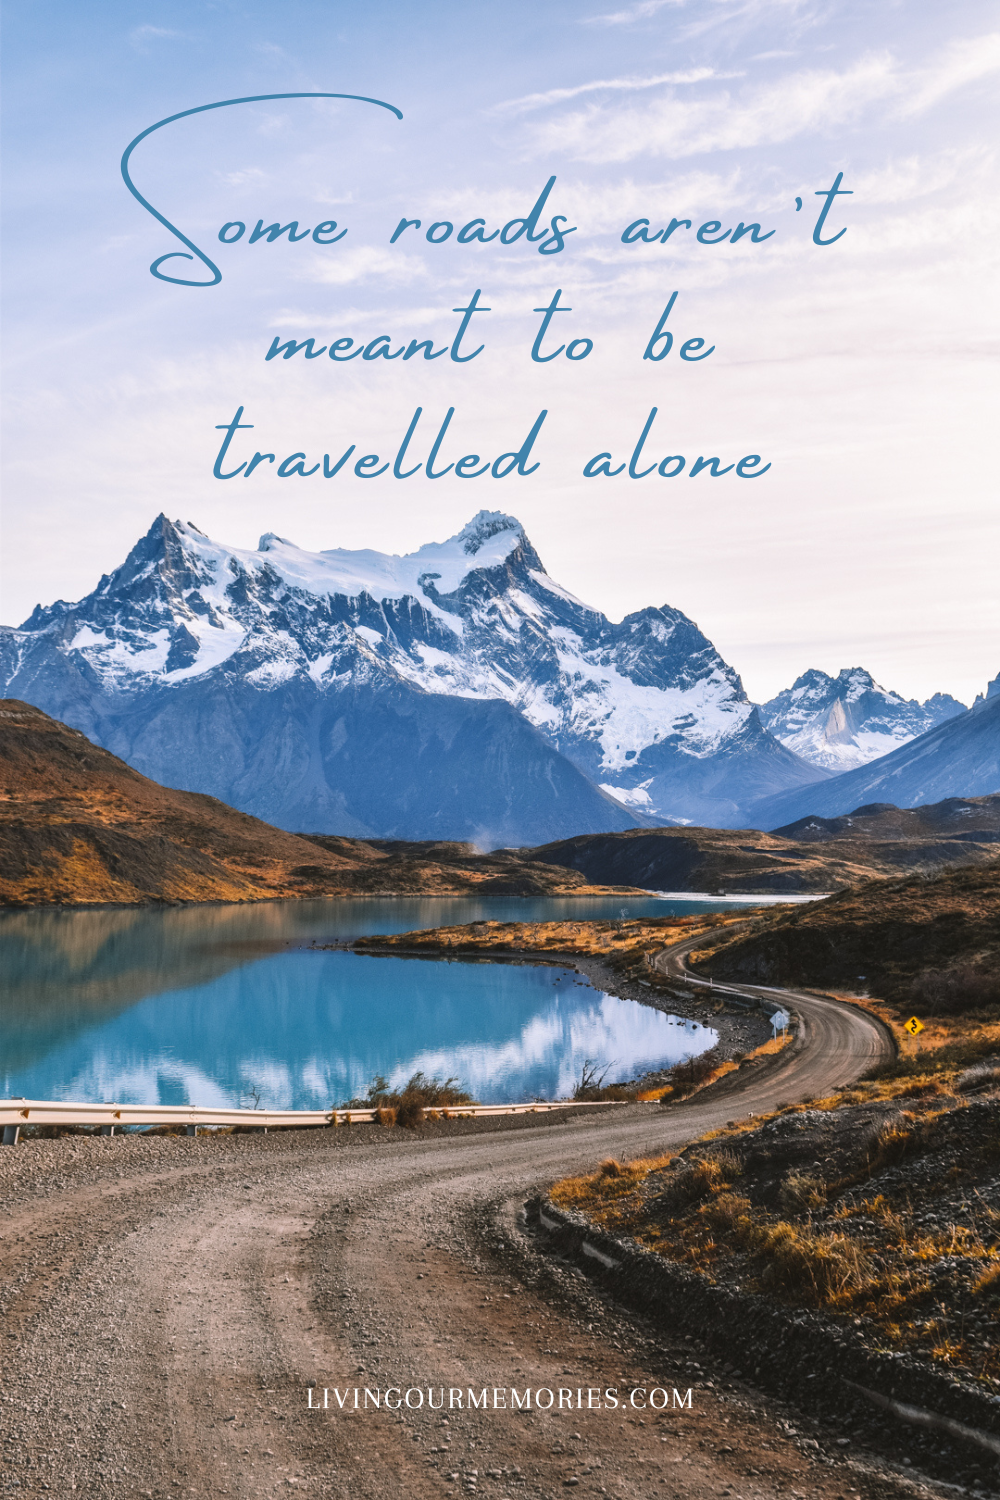 Some roads aren't meant to be travelled alone.